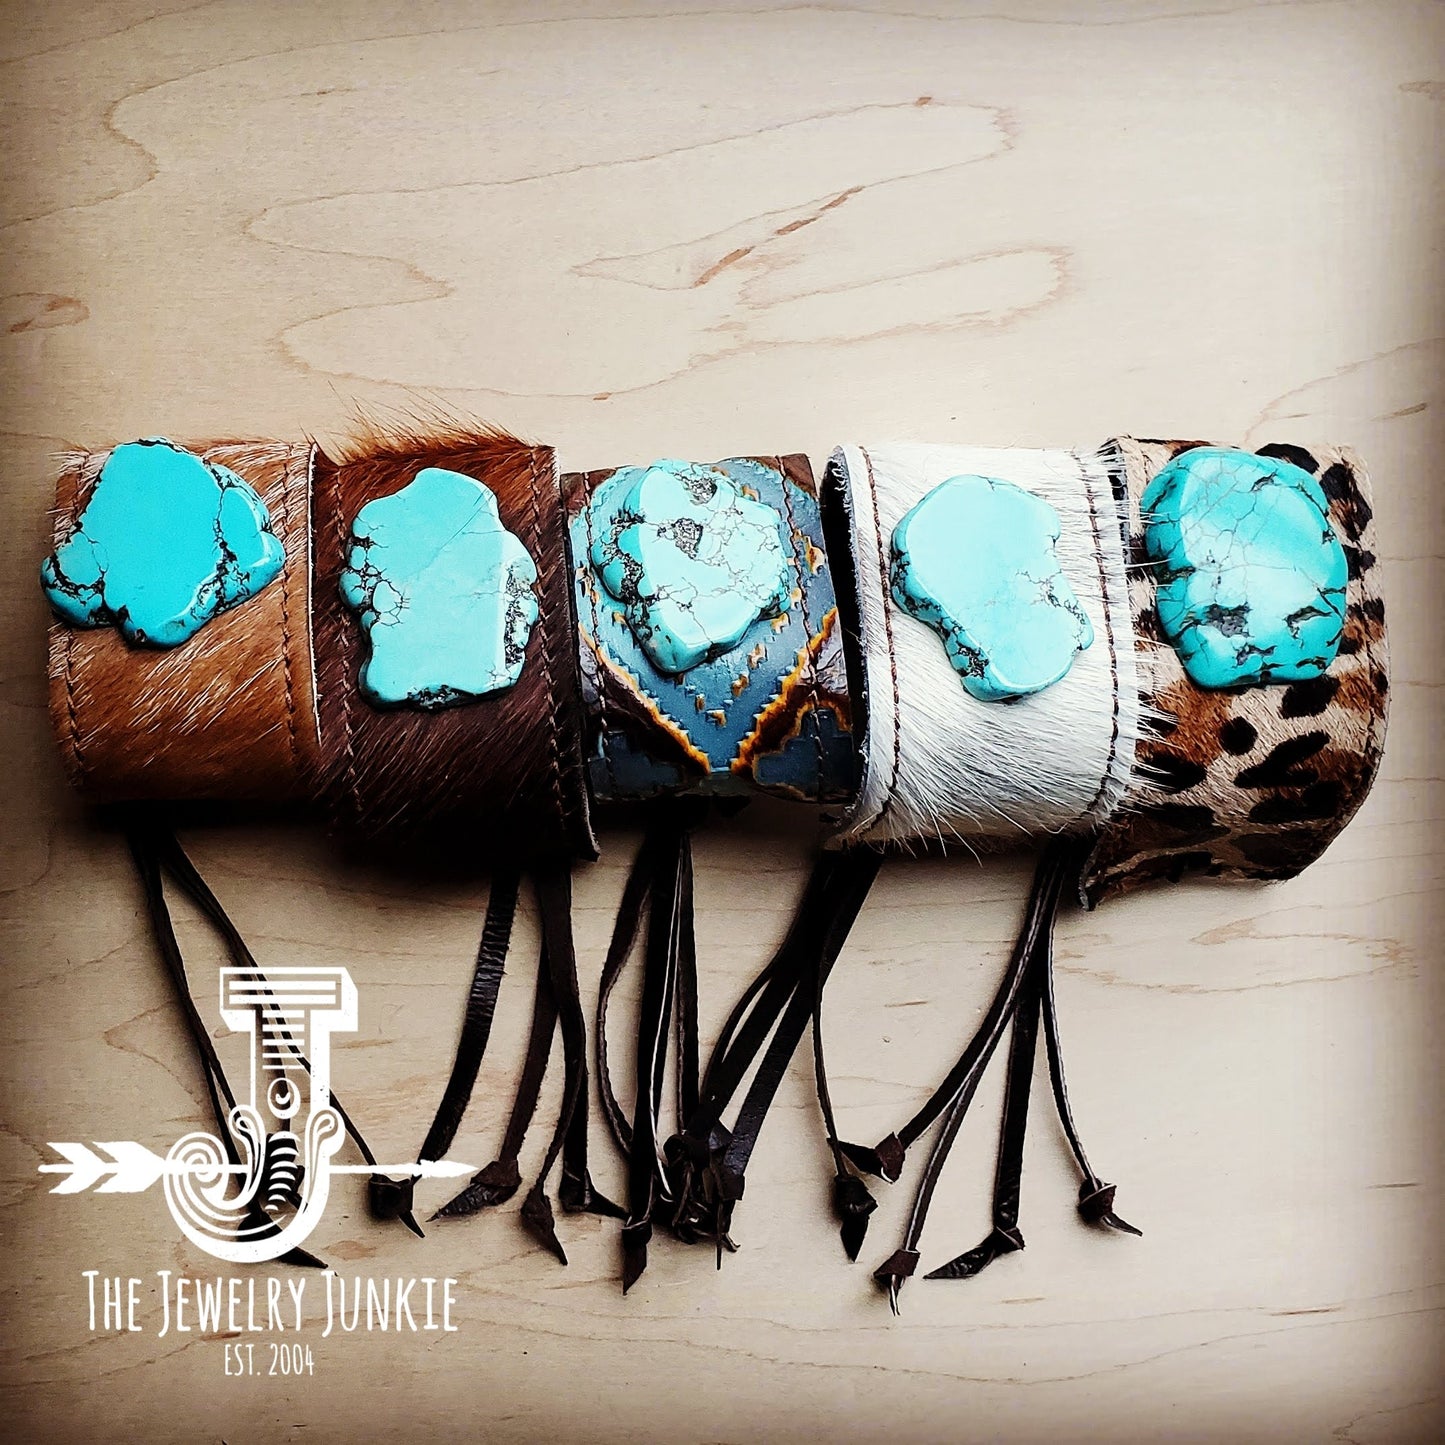 Leather Cuff w/ Leather Tie-Dark Brown Hide and Turquoise Slab (011p)